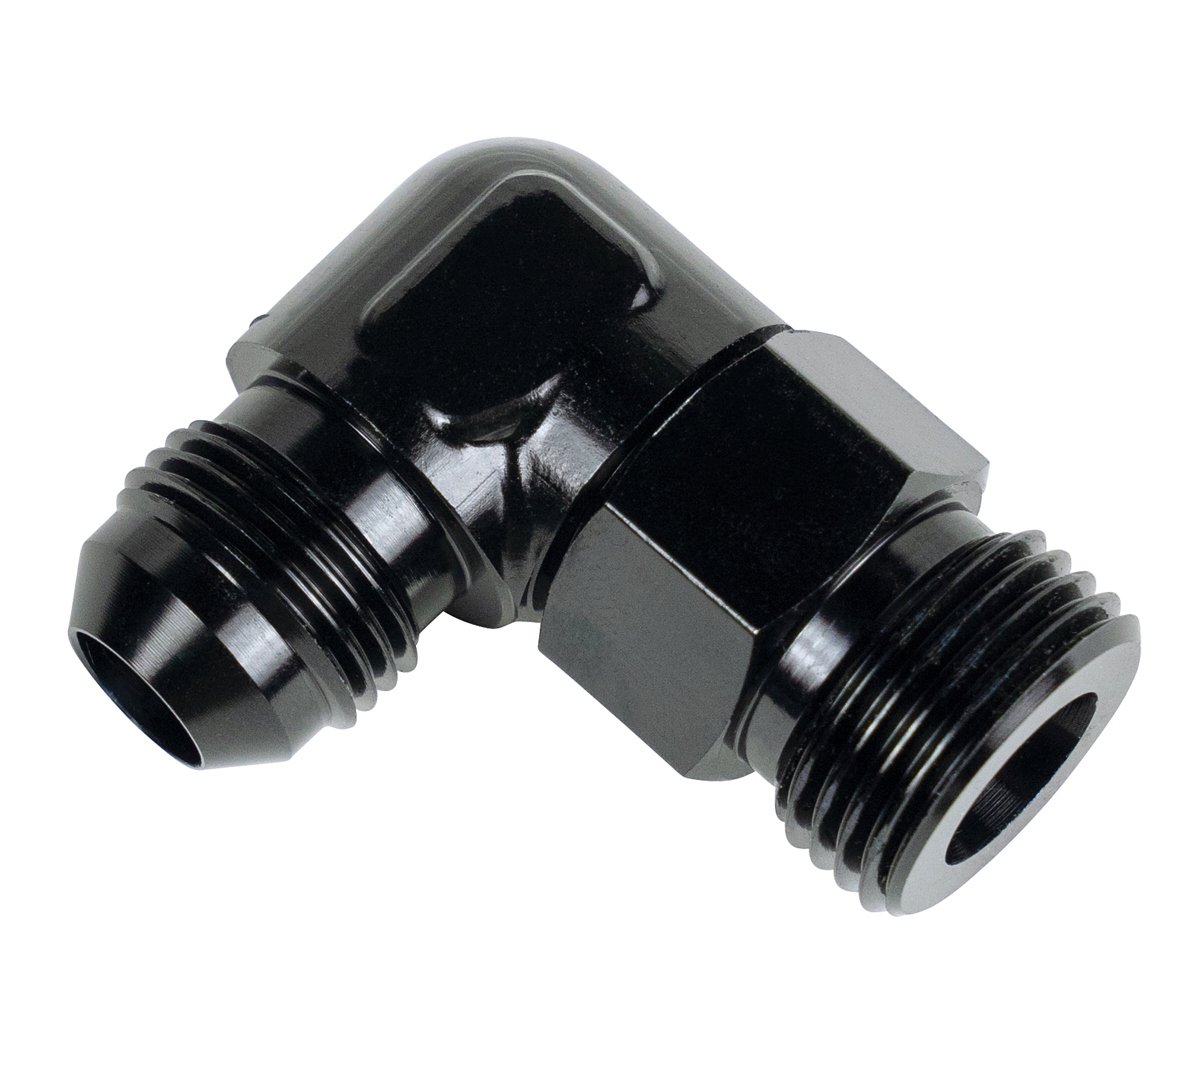 Derale 59510 Fitting, Adapter, 90 Degree, 7/8-14 in NPT Male to 10 AN Male O-Ring, Aluminum, Black Anodized, Each